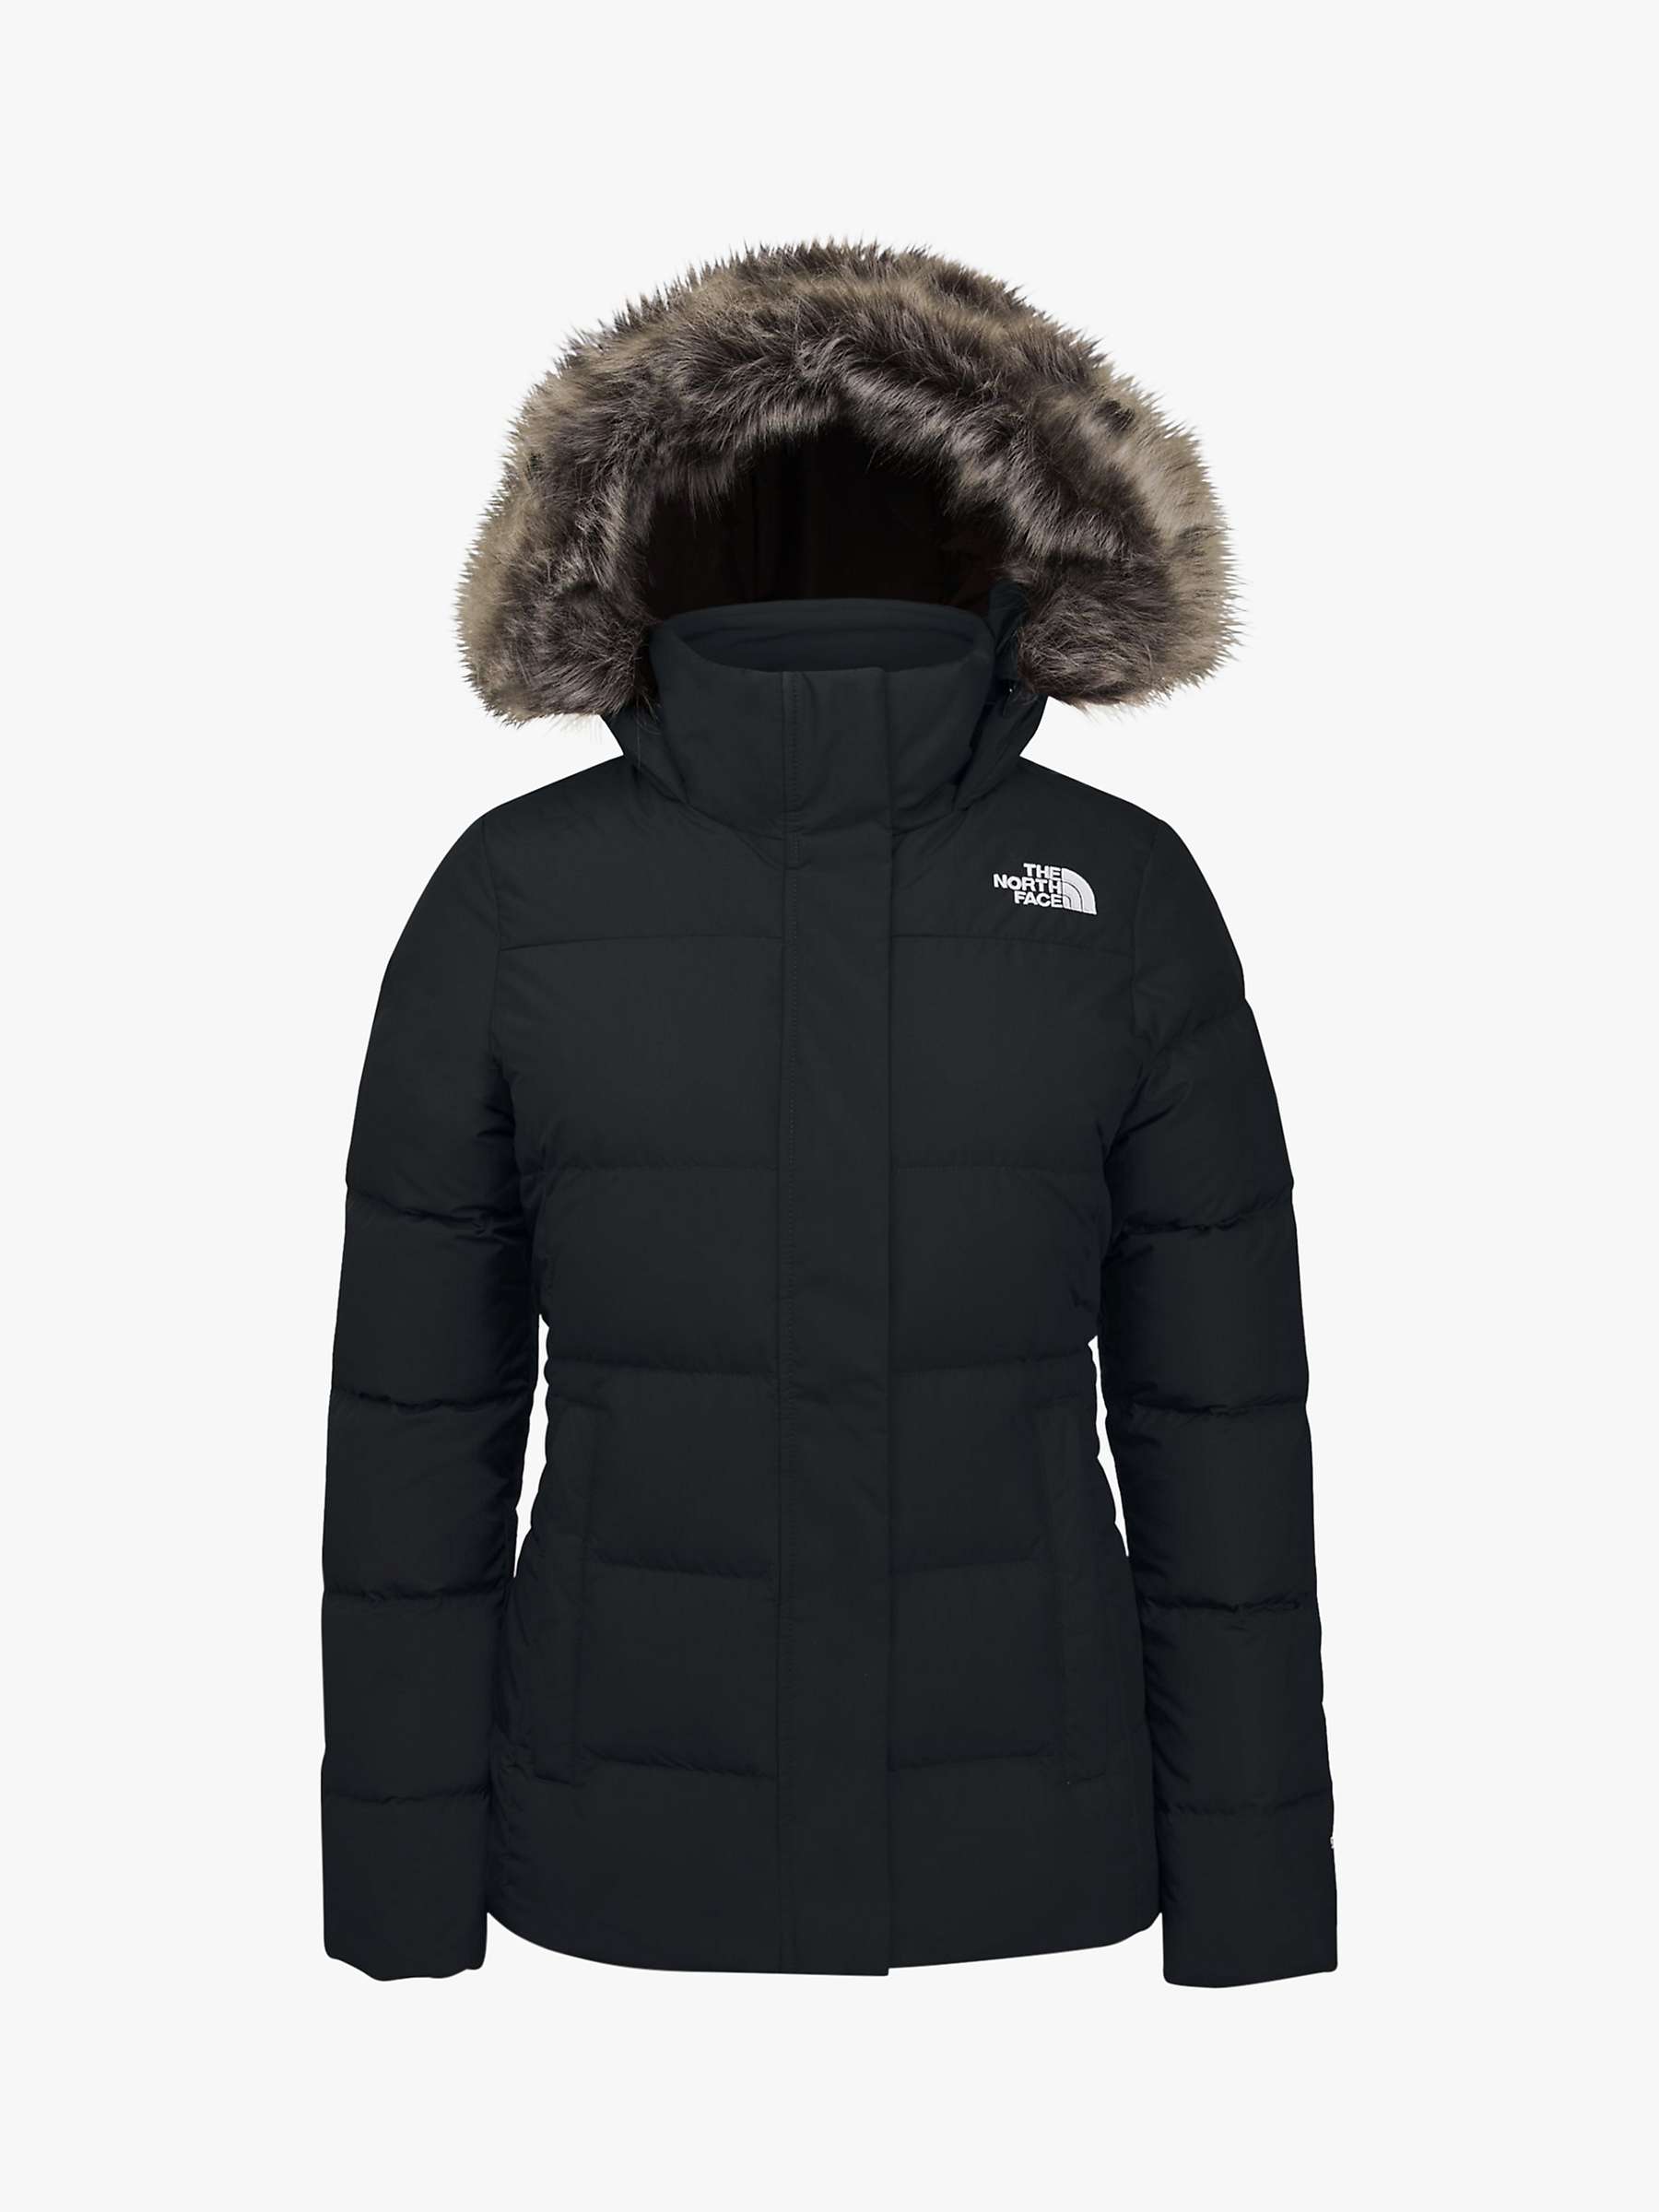 Buy The North Face Gotham Women's Jacket Online at johnlewis.com